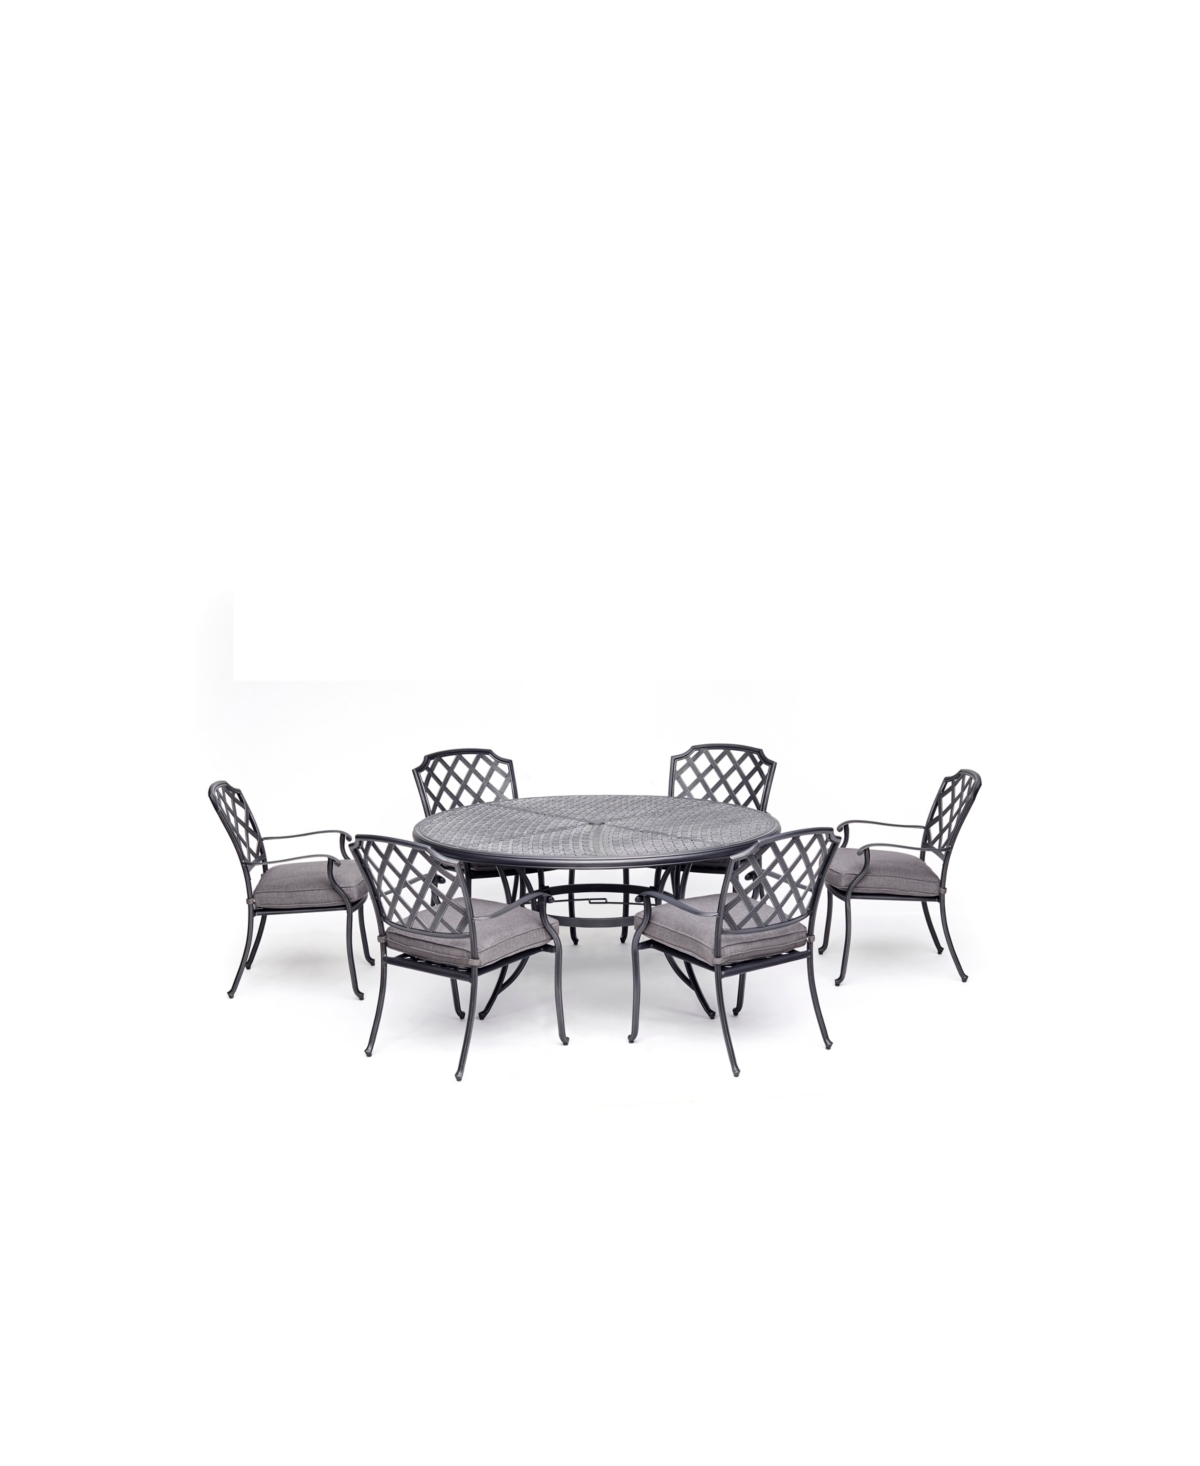 Vintage Ii Outdoor 7-Pc. Dining Set (61 Round Table & 6 Dining Chairs) With Outdura Cushions, Created for Macys